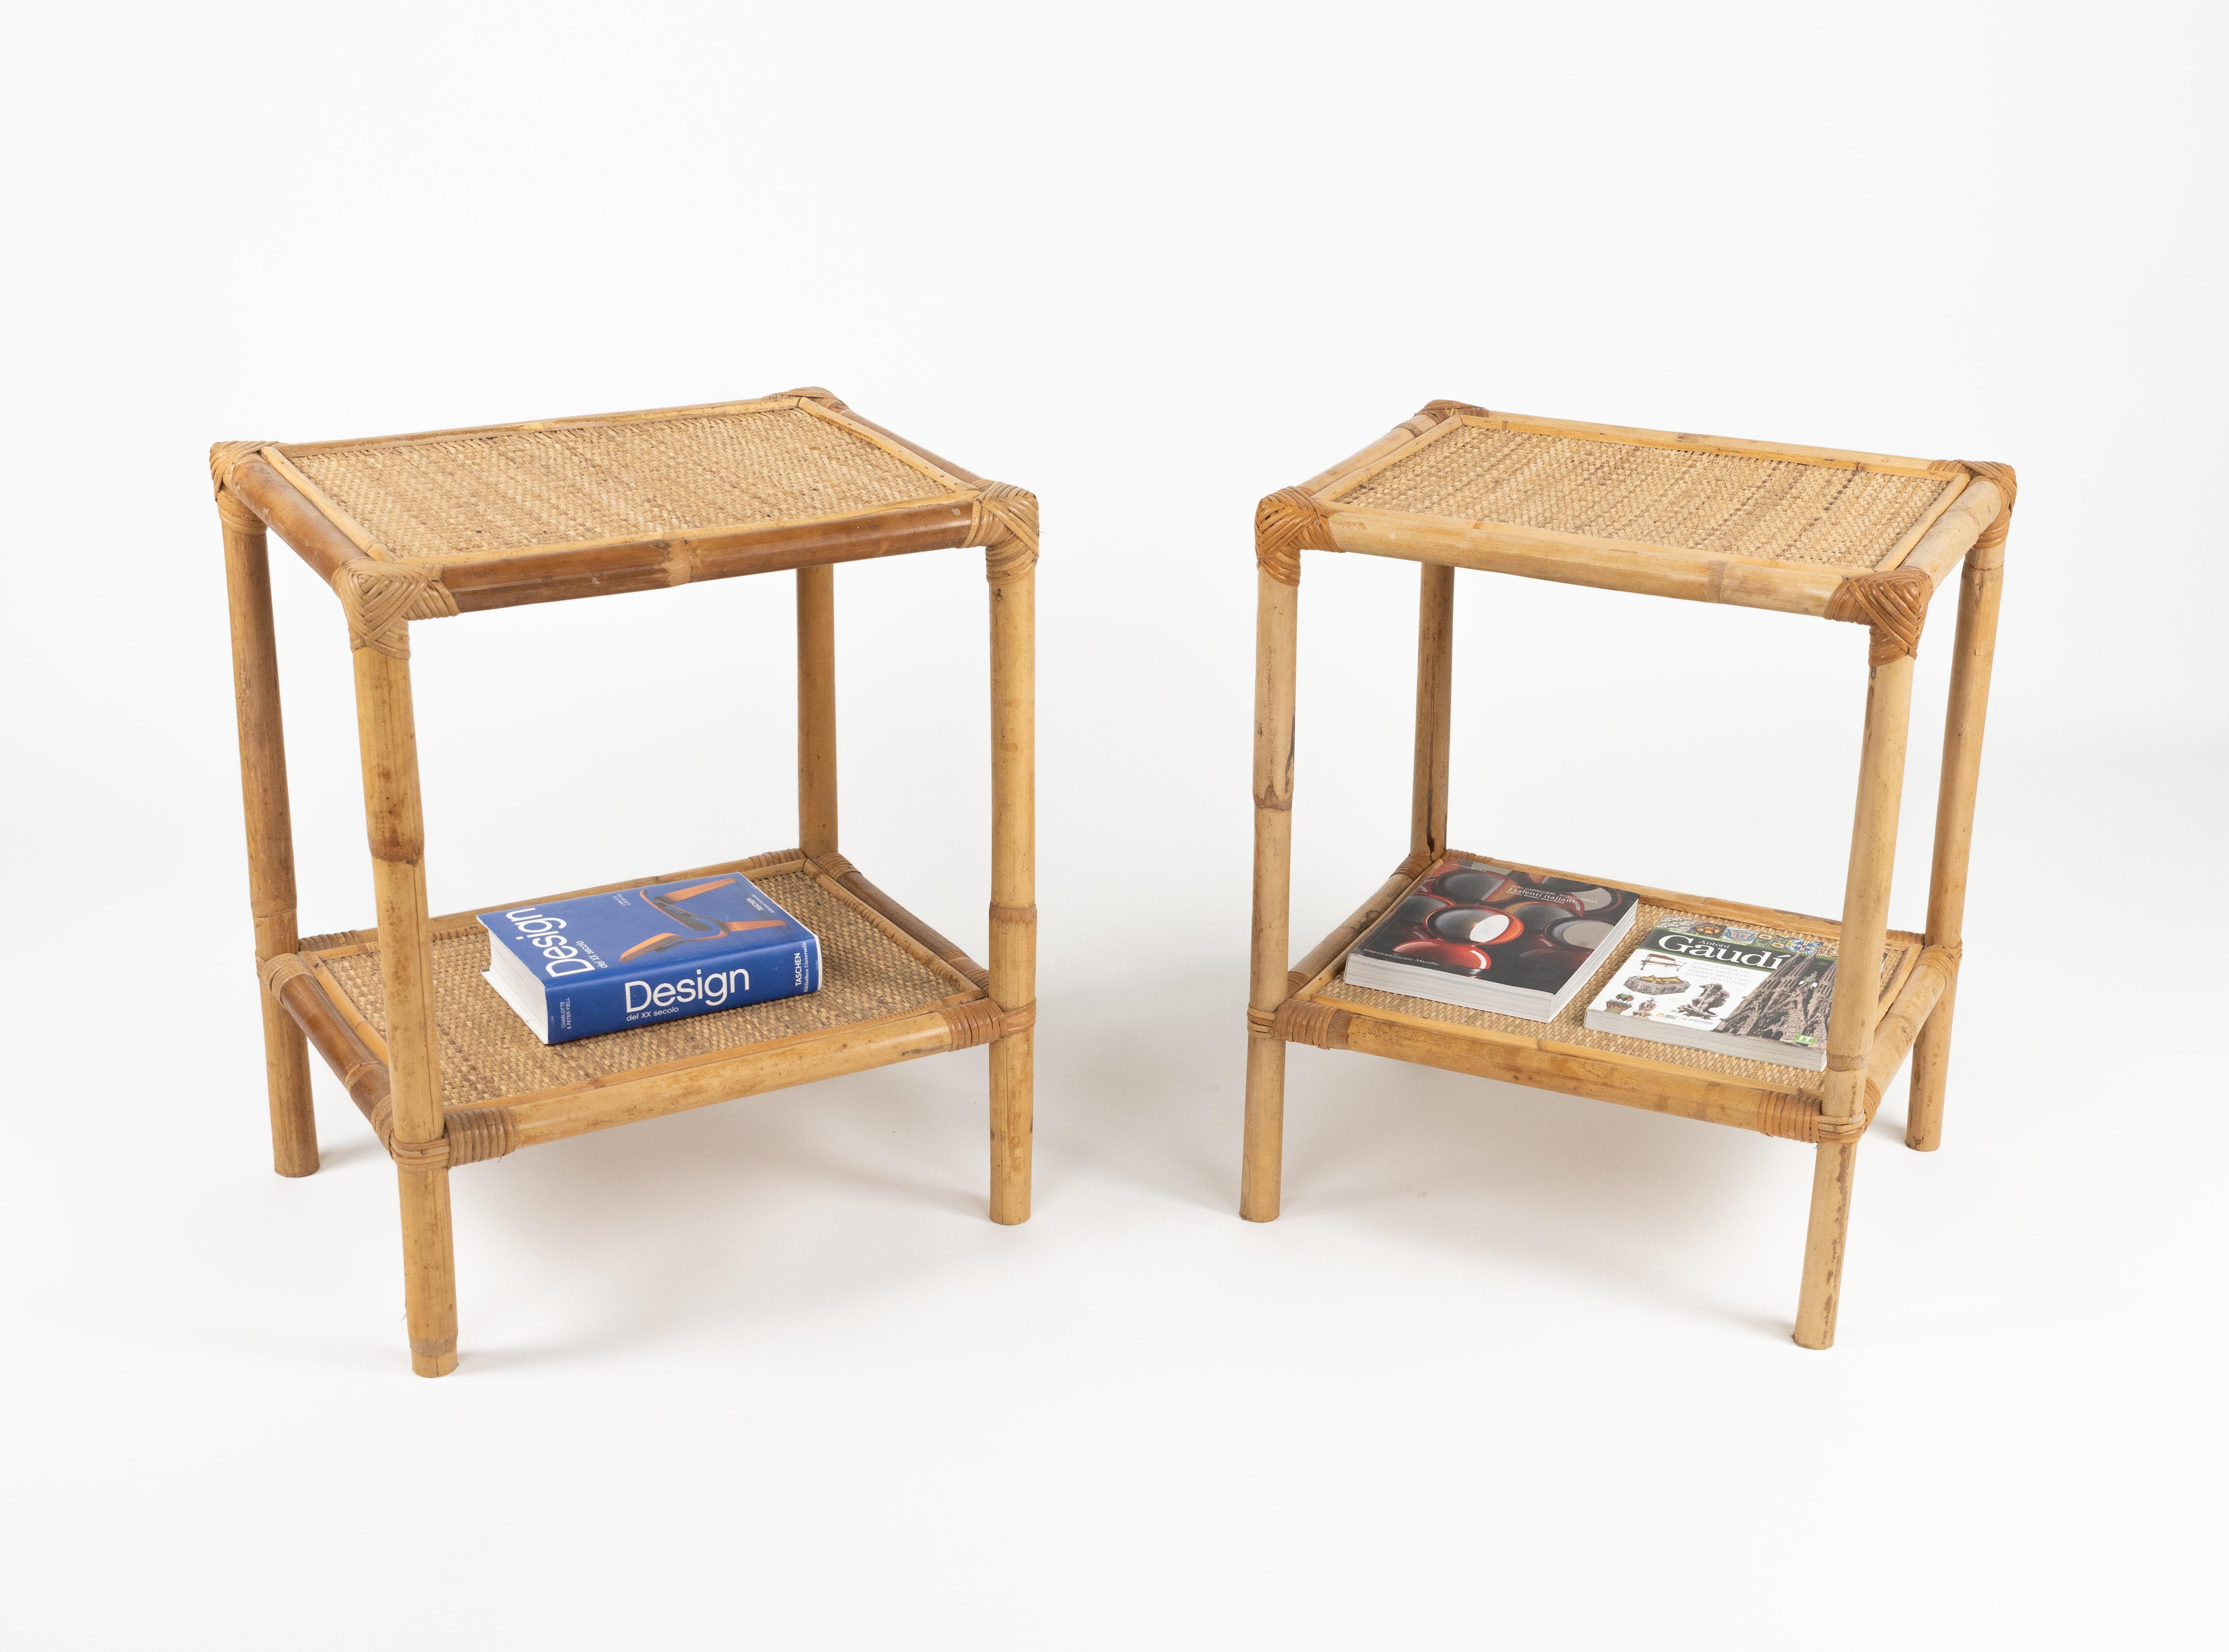 Midcentury Pair of Bed Side Tables in Bamboo, Rattan & Wicker, Italy 1970s For Sale 1